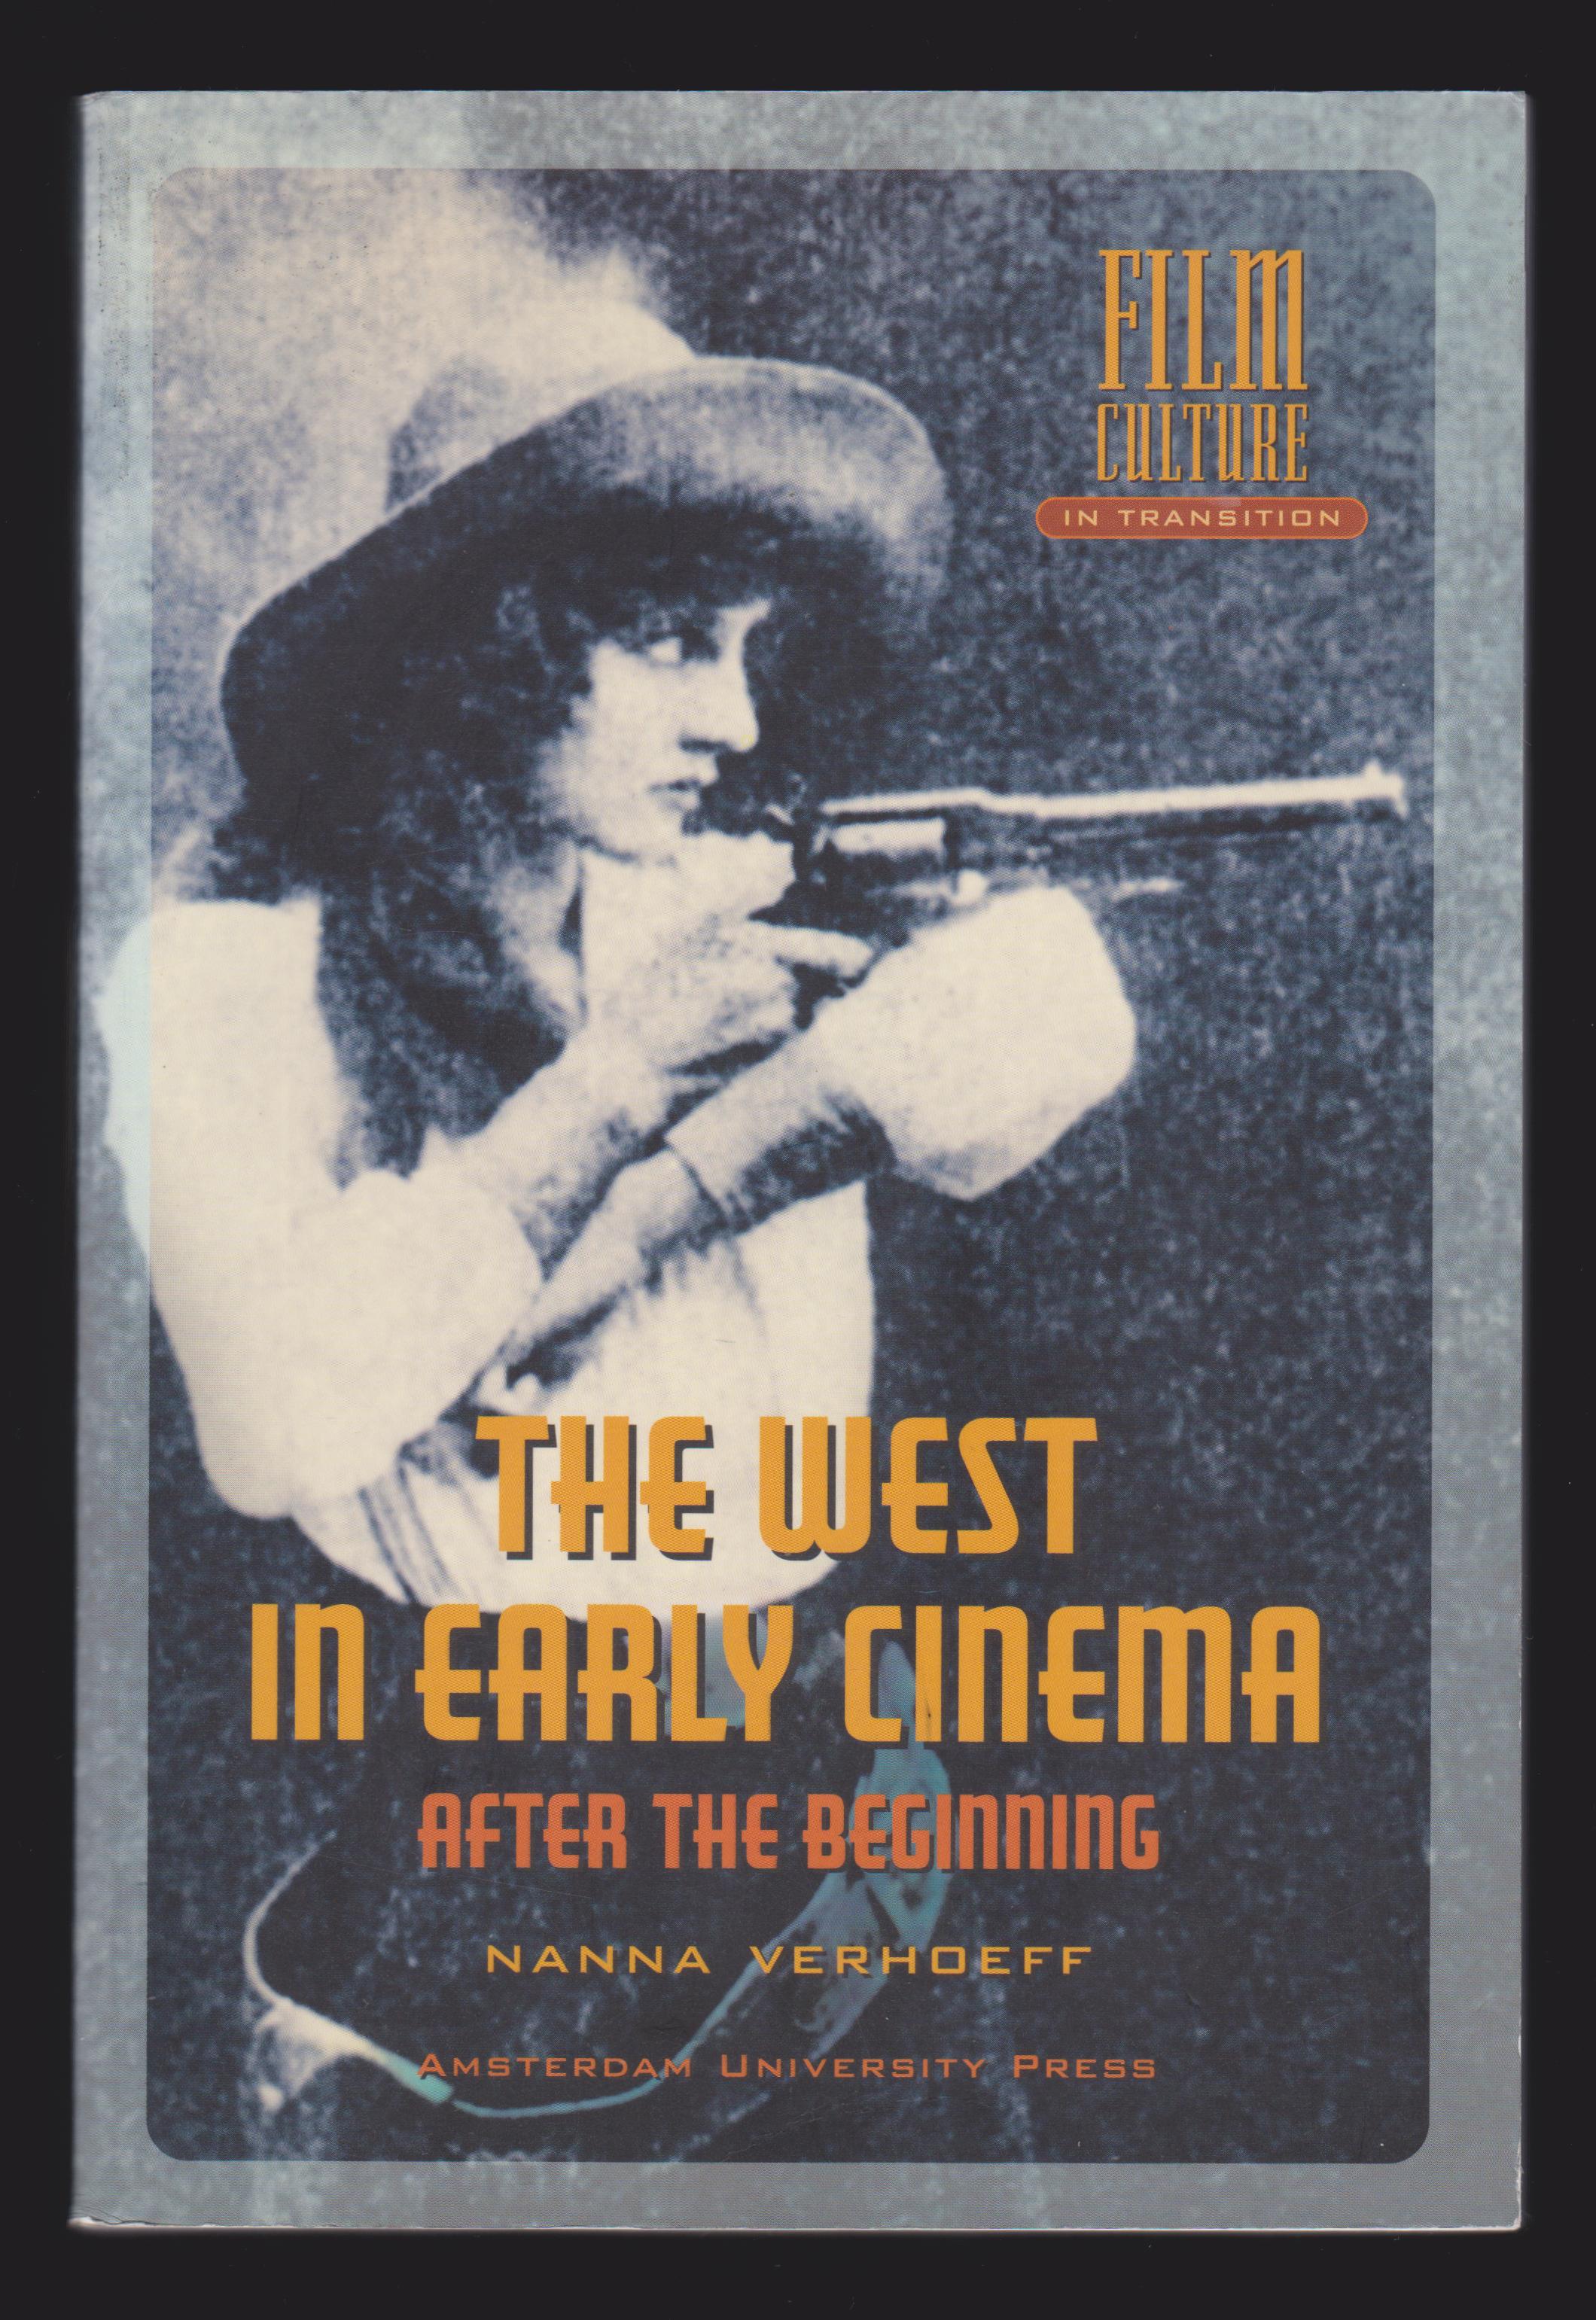 The West in Early Cinema: After the Beginning (Film Culture in Transition) - Nanna Verhoeff